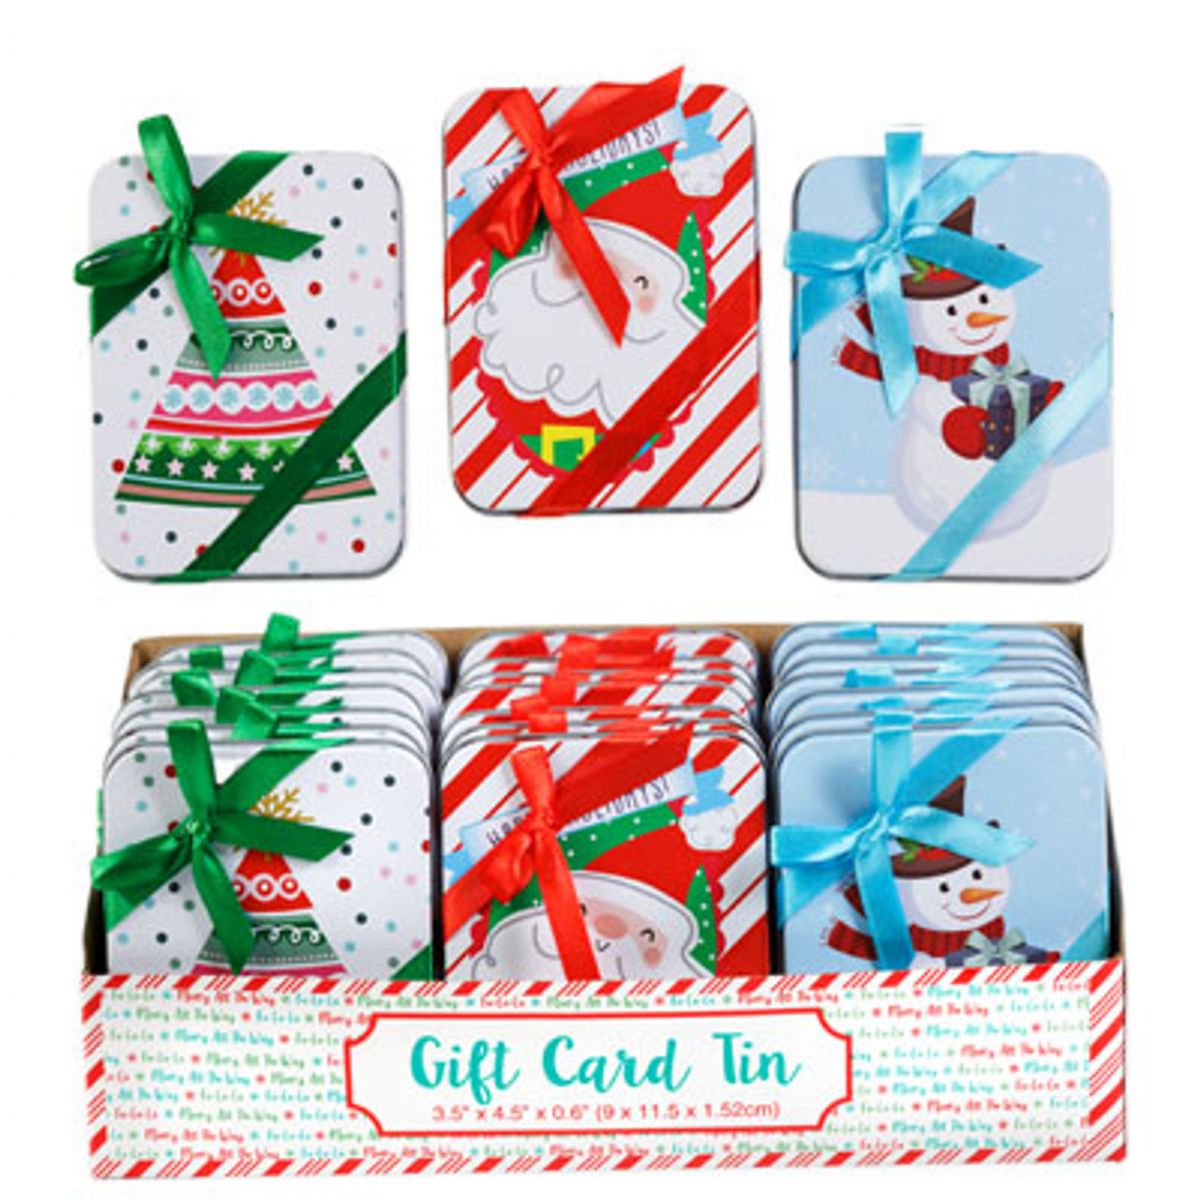 Wholesale Footwear Gift Tin W/bow On Lid 3ast Xmas Prints 3.5x0.6x4.5in 24pc Pdq Easy Peel Label